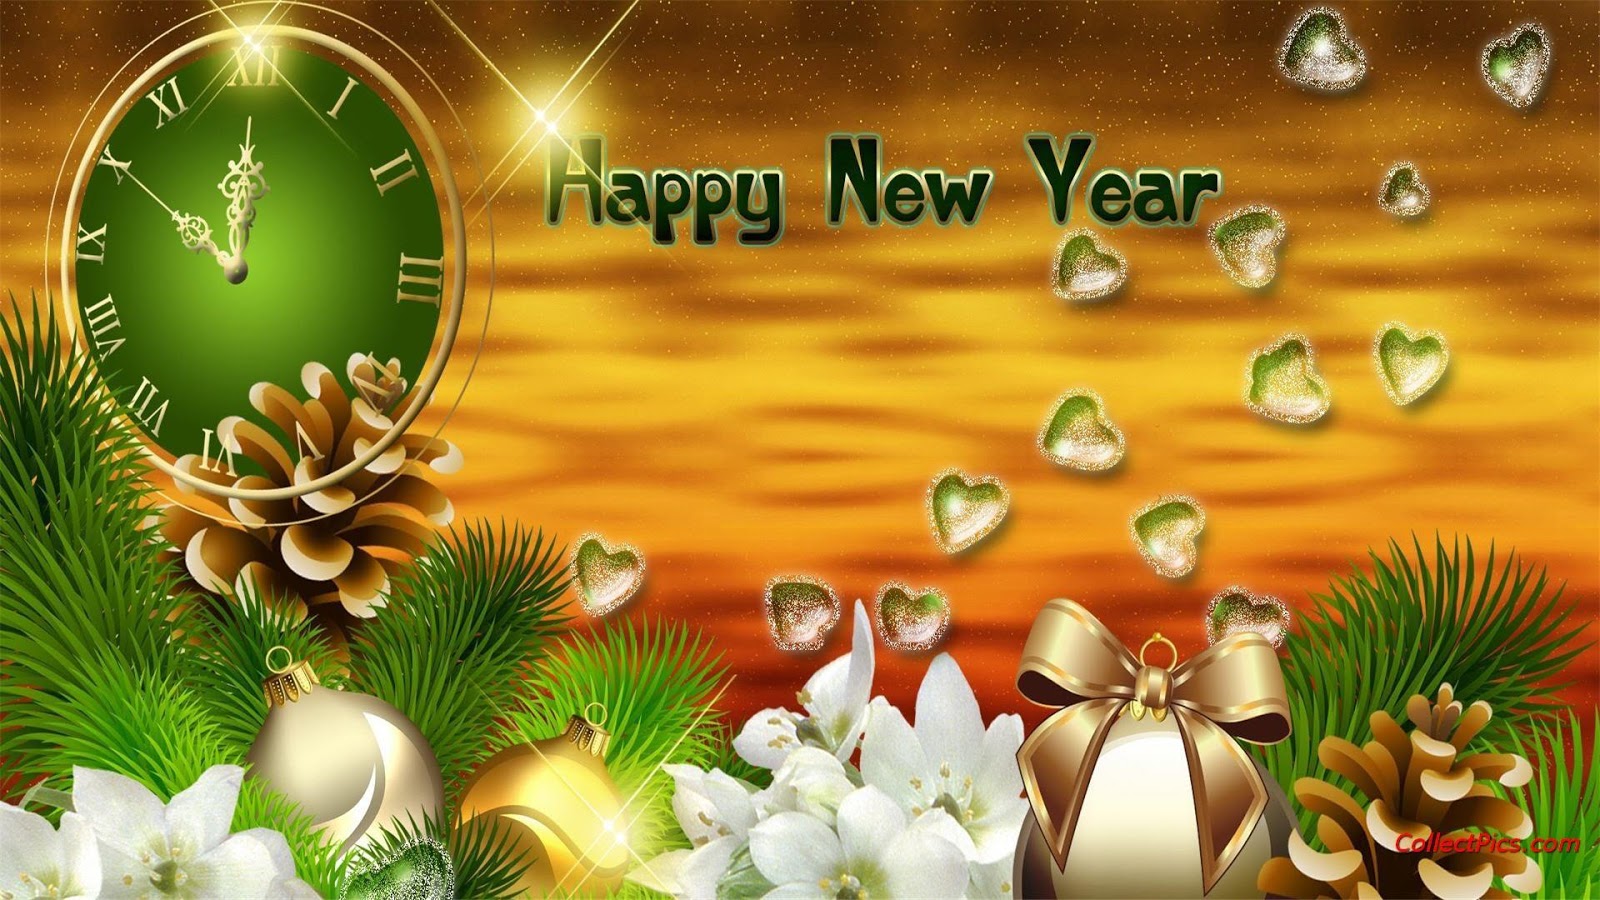 Happy New Year Wallpapers 2016 Free Download – Images Shine